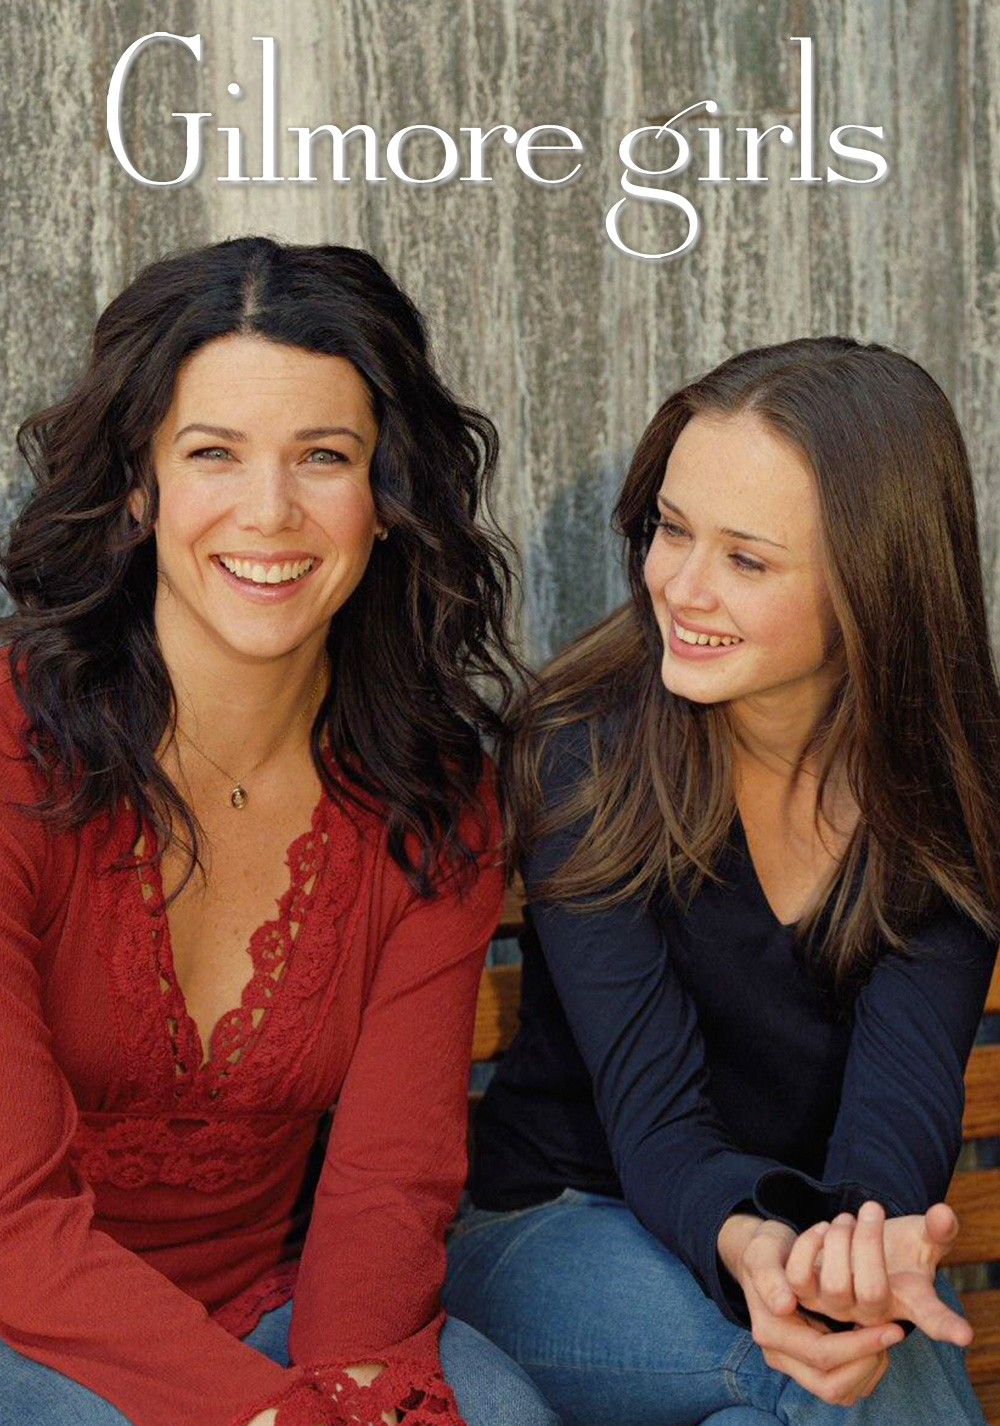 Top 10 Series You Can Watch To Kill Depression-GILMORE GIRLS